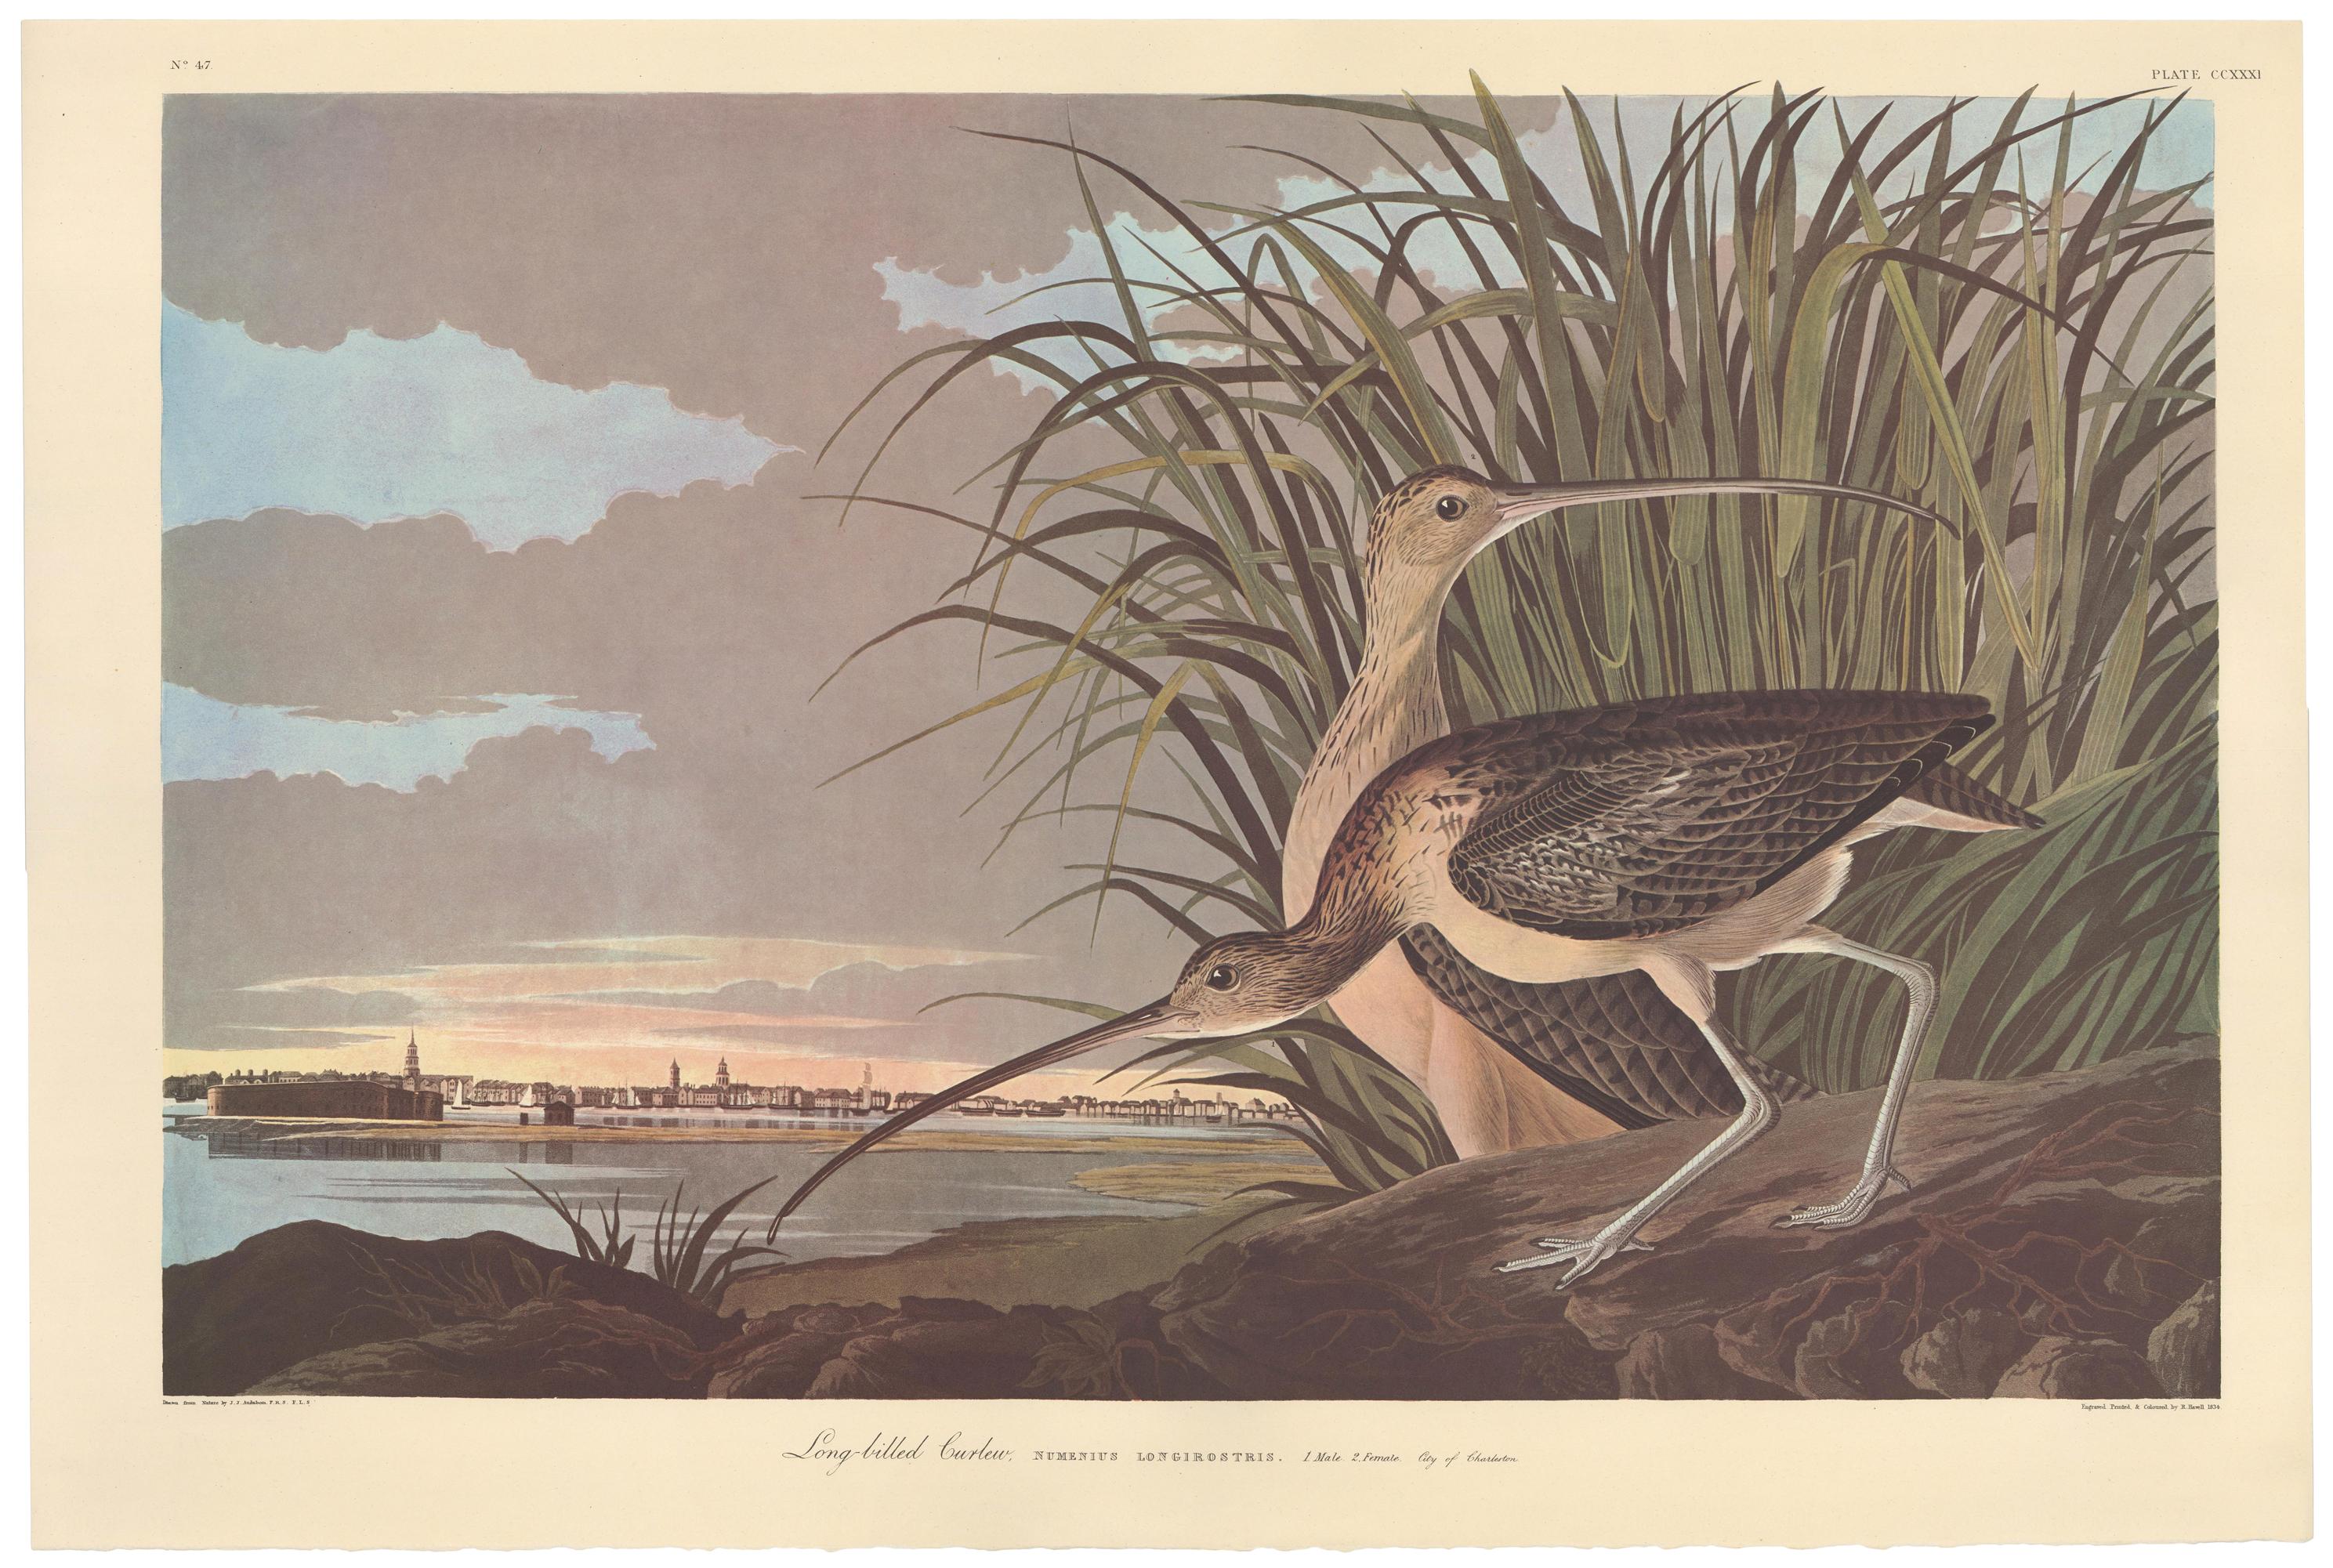 Plate CCXXXI, Long-billed Curlew, posthumous reproduction after John James Audubon from The Birds of America, the Amsterdam Edition, printed in Amsterdam, 1971-73. Original multicolored photo-offset print. "G Schut and Zonen" watermark at lower edge